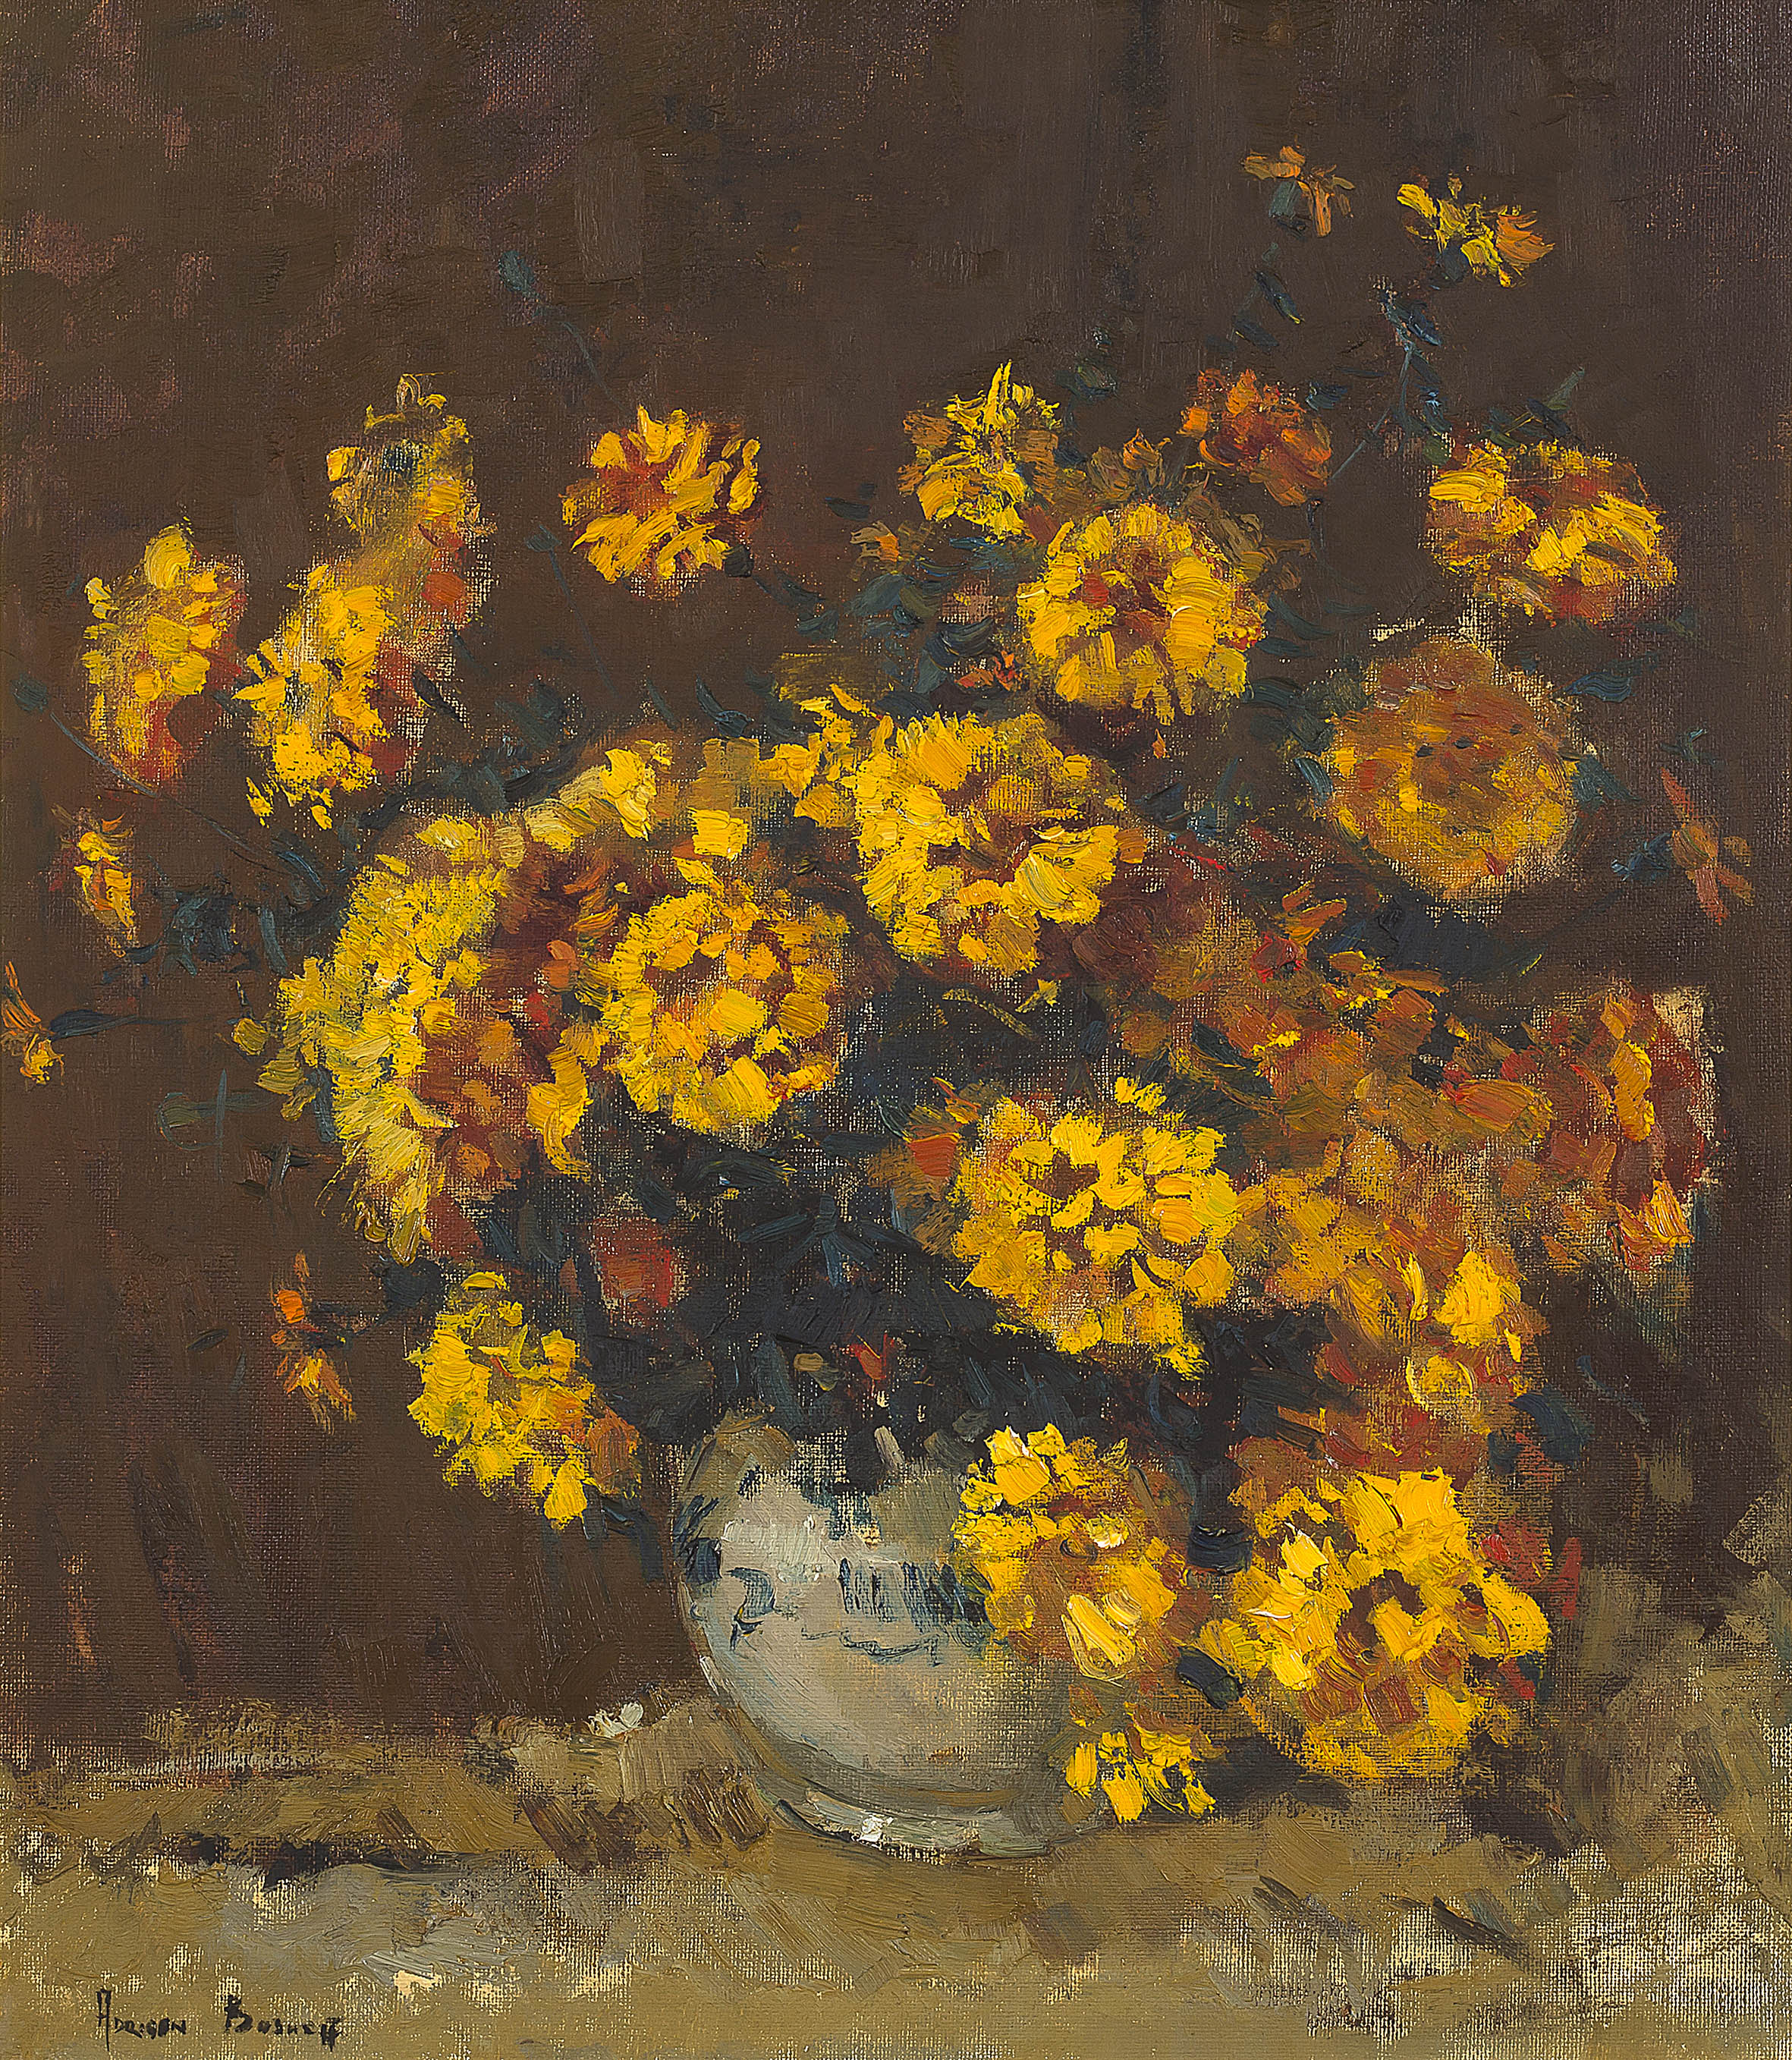 Adriaan Boshoff; Still Life with Marigolds in a Vase